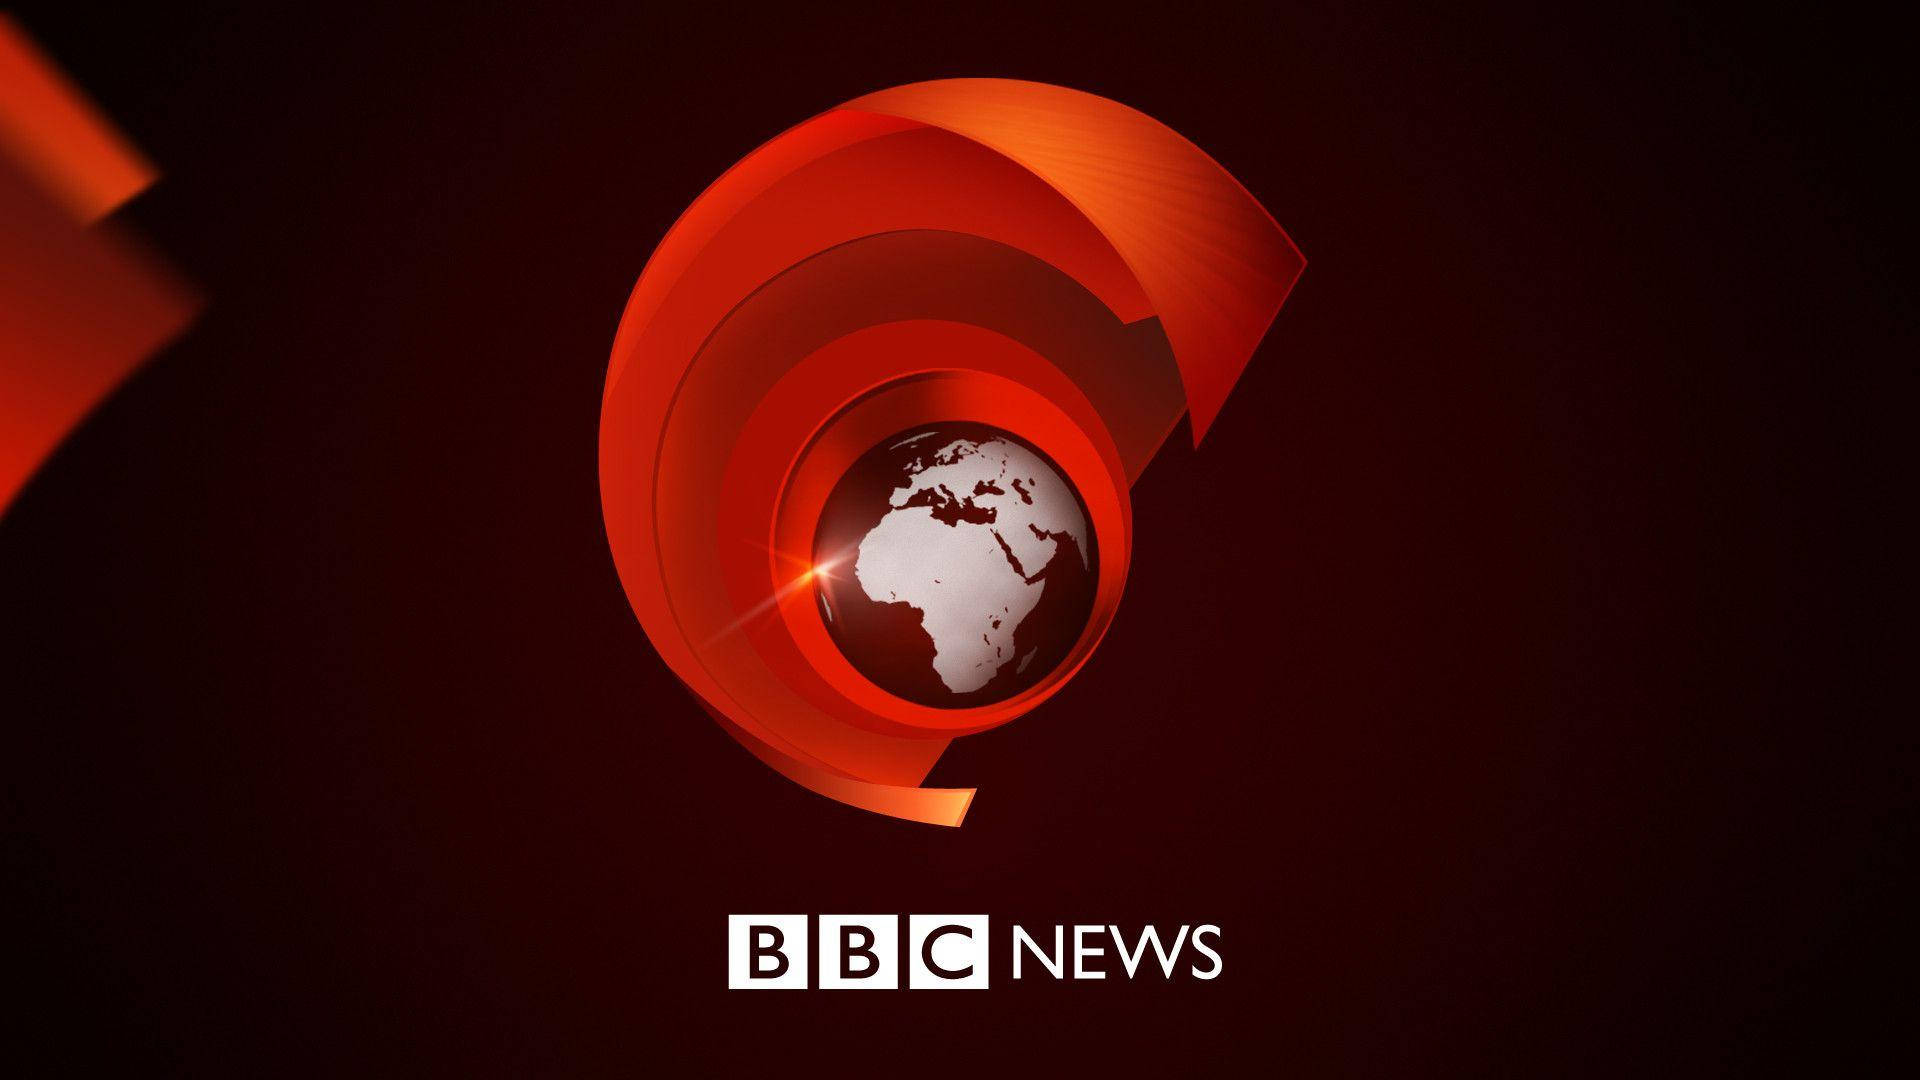 Bbc News Pictures Wallpaper